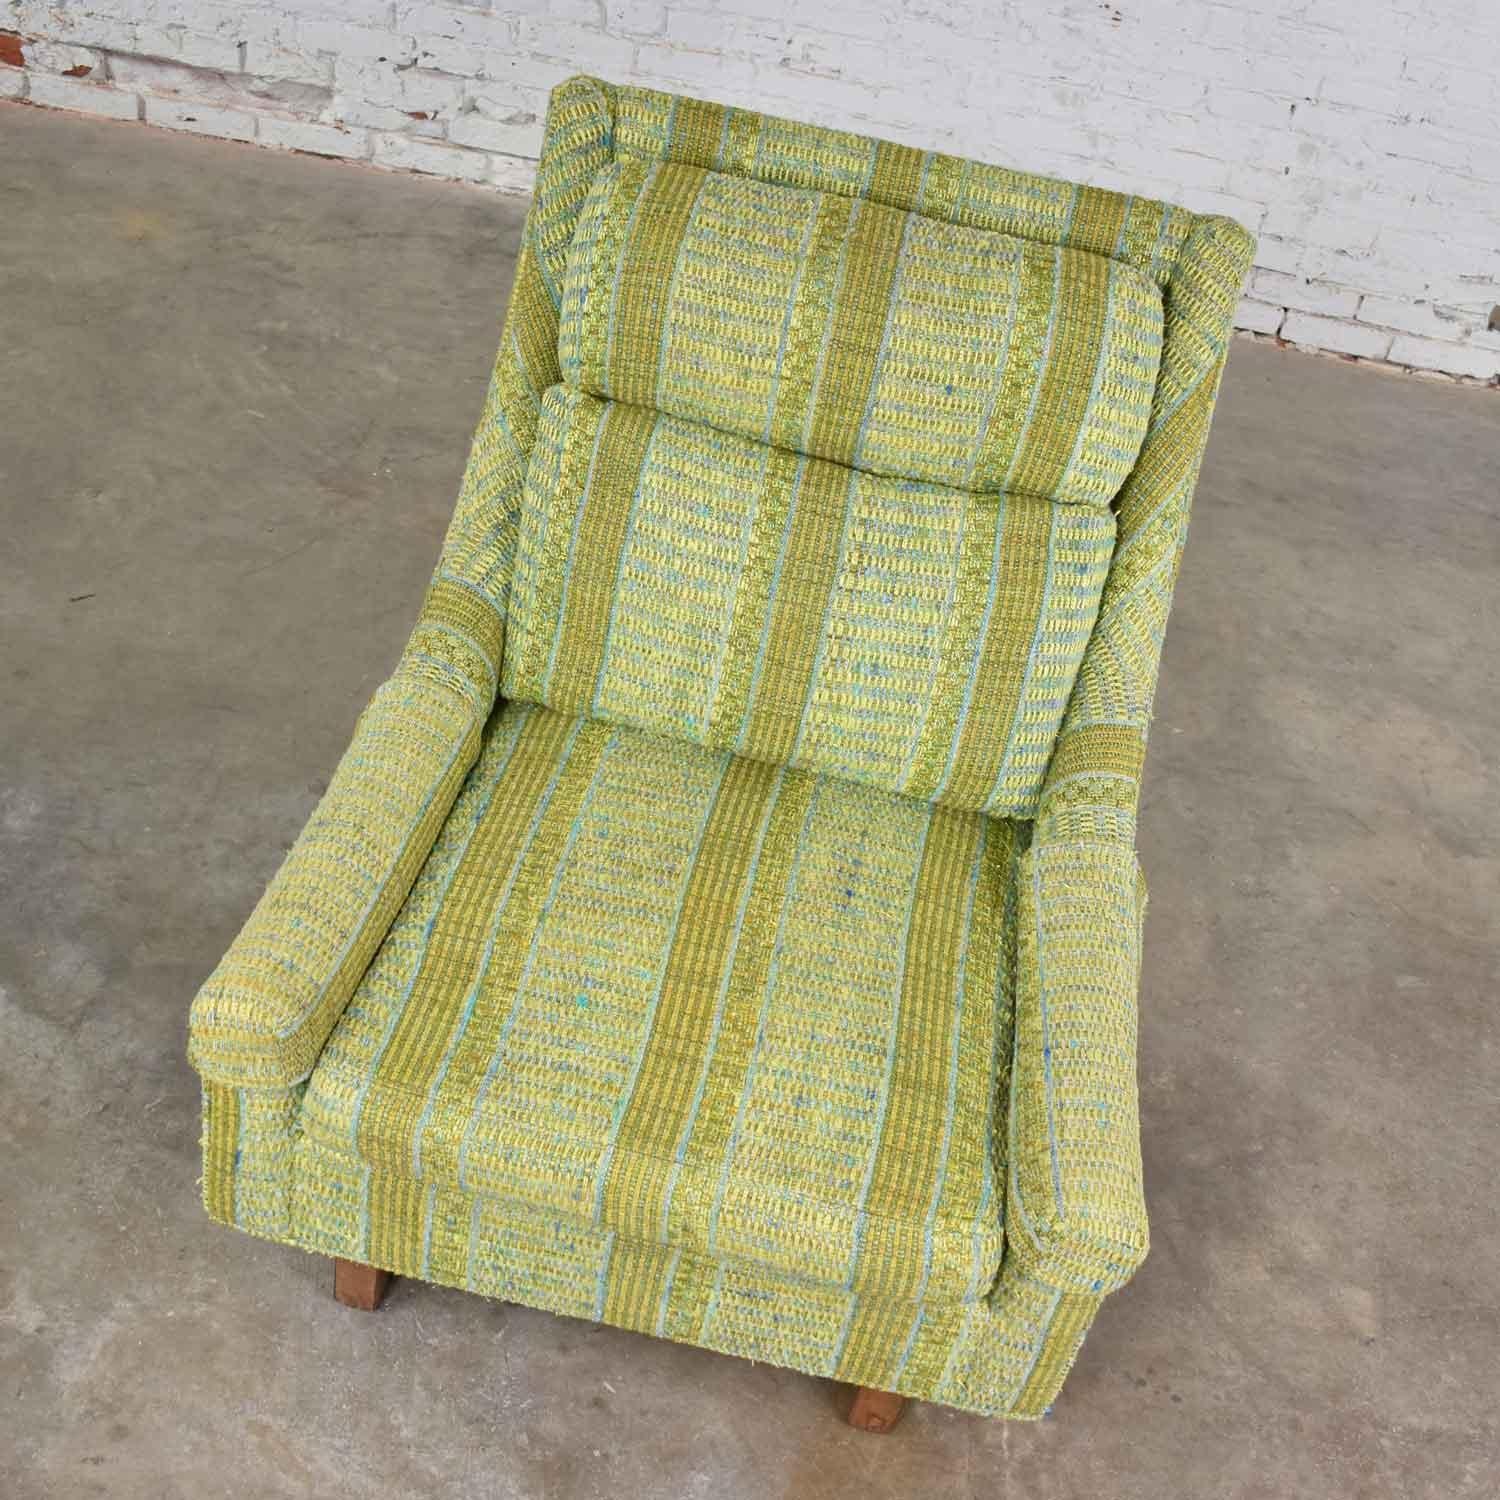 20th Century Vintage Mid-Century Modern High Back Lounge Chair by Flair Division of Bernhardt